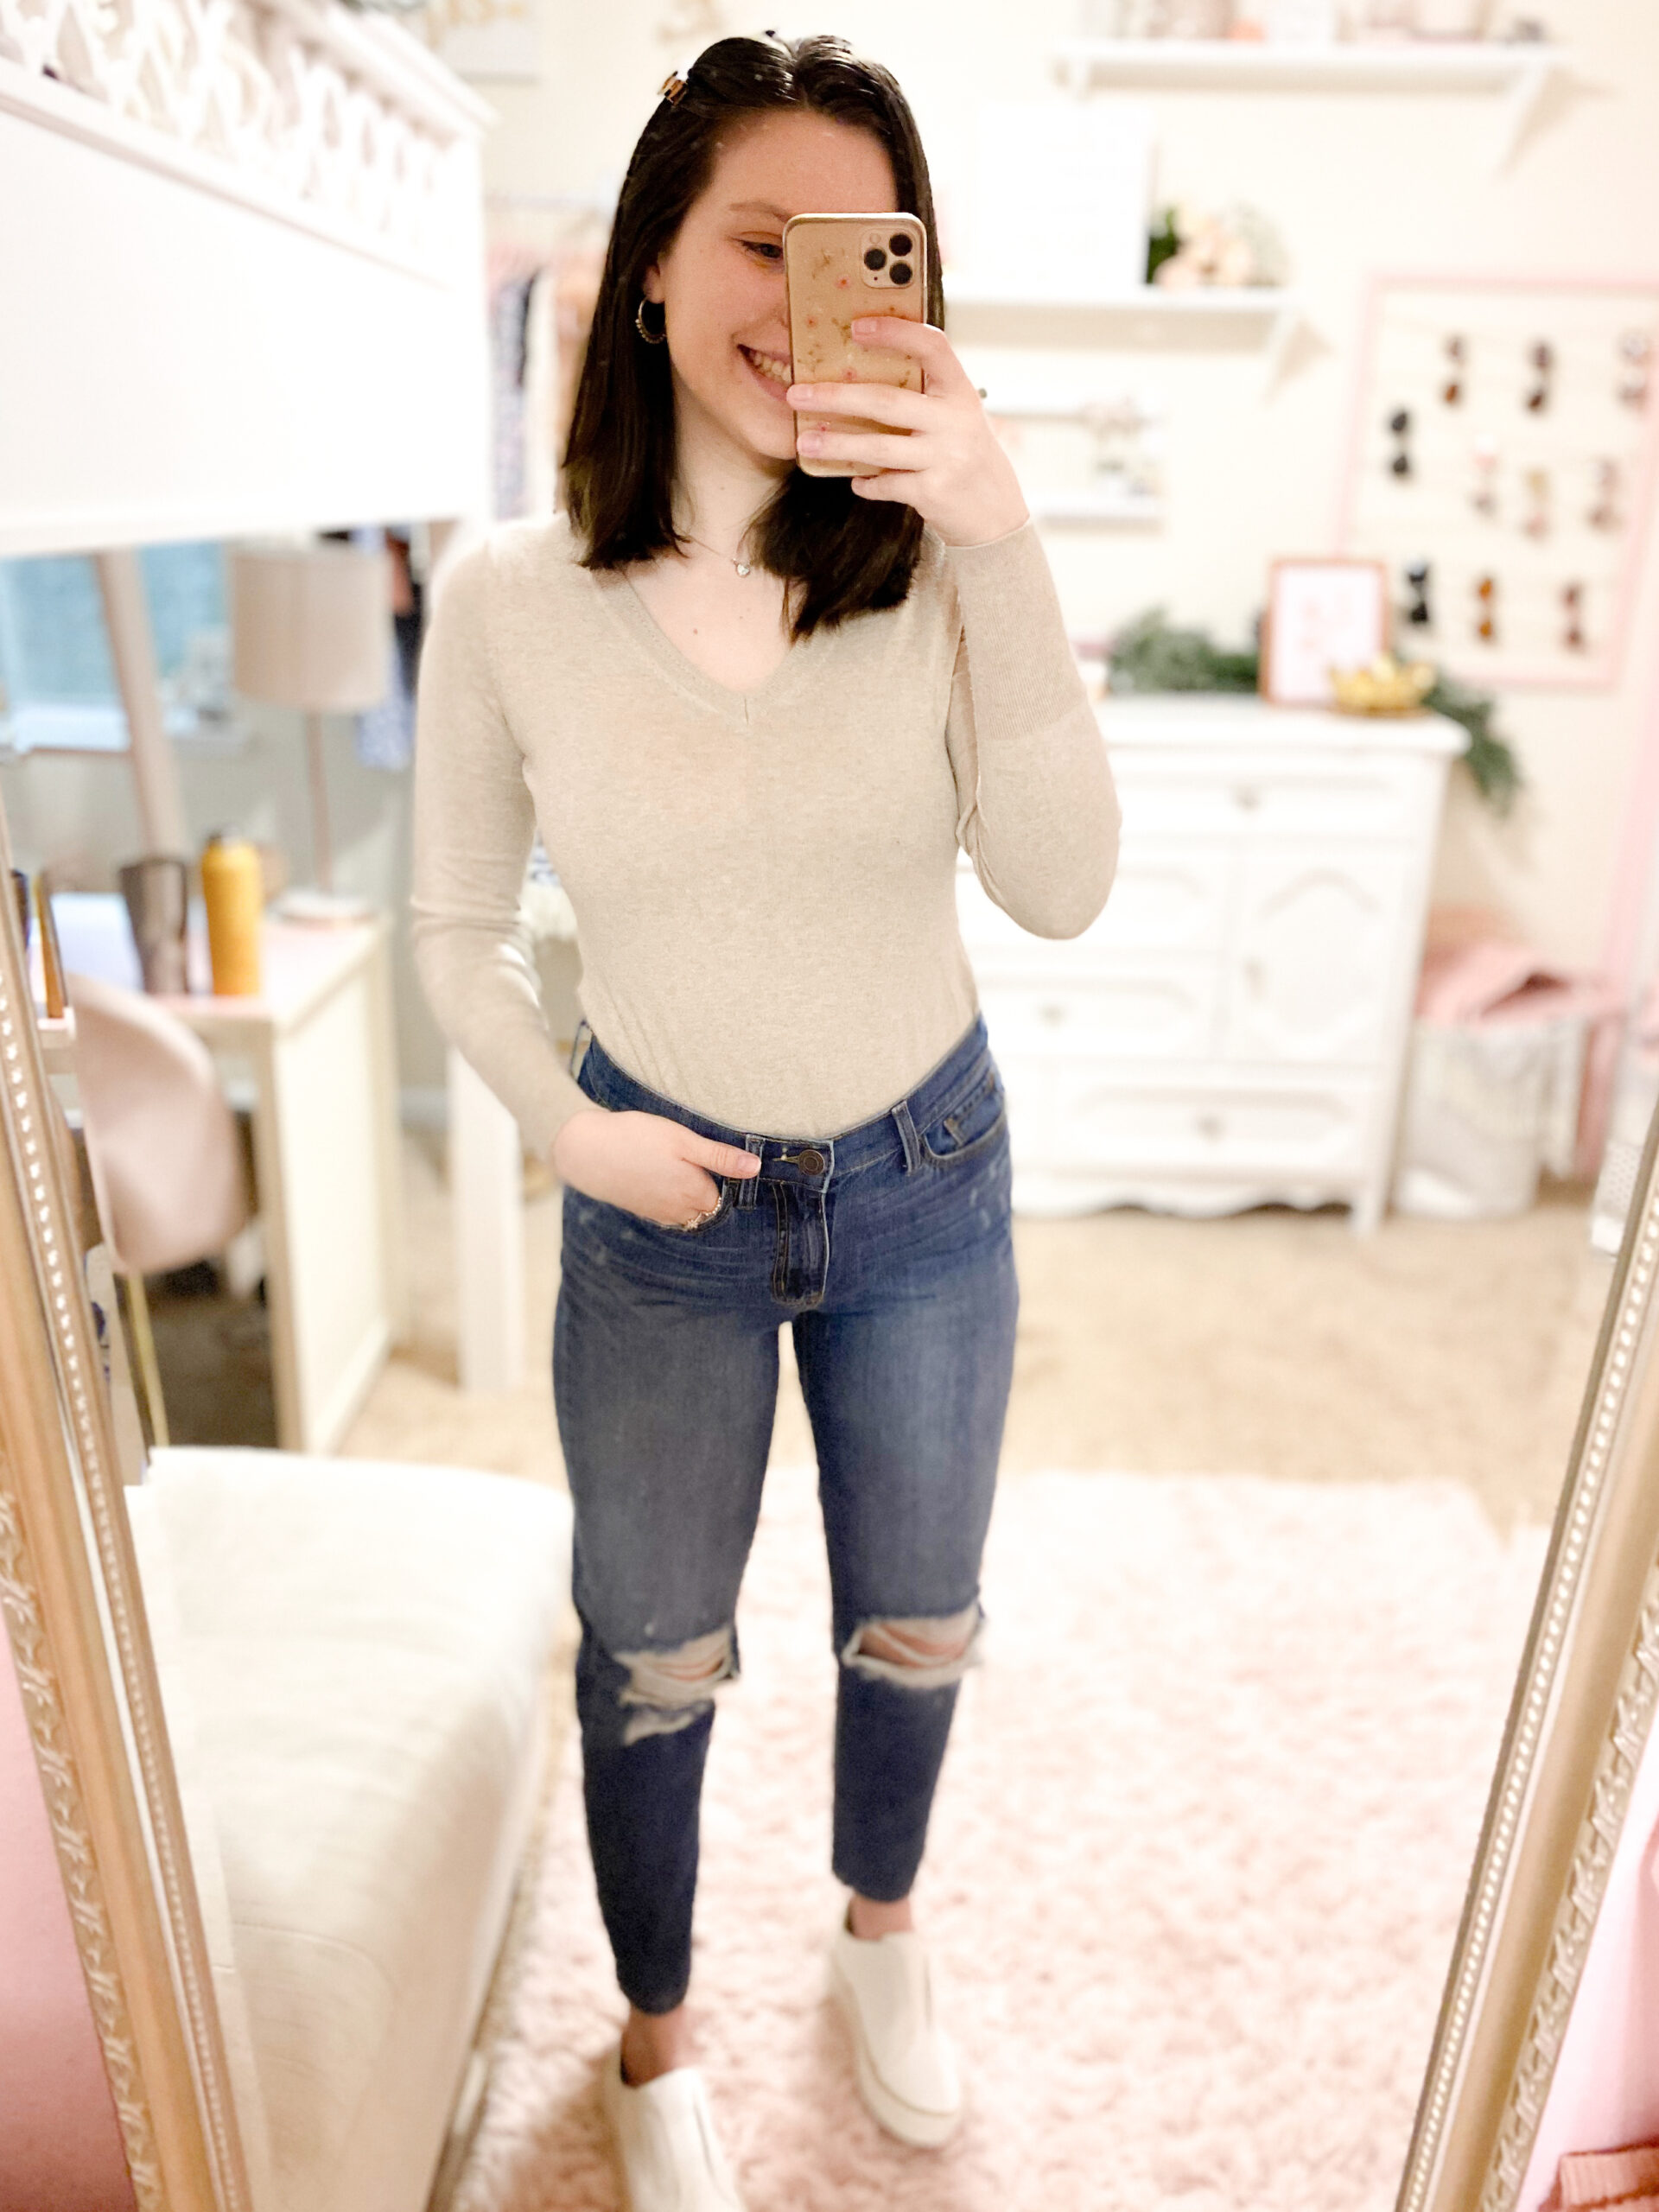 5 Cute Outfits For Cold Spring Days | The Best Looks For Spring